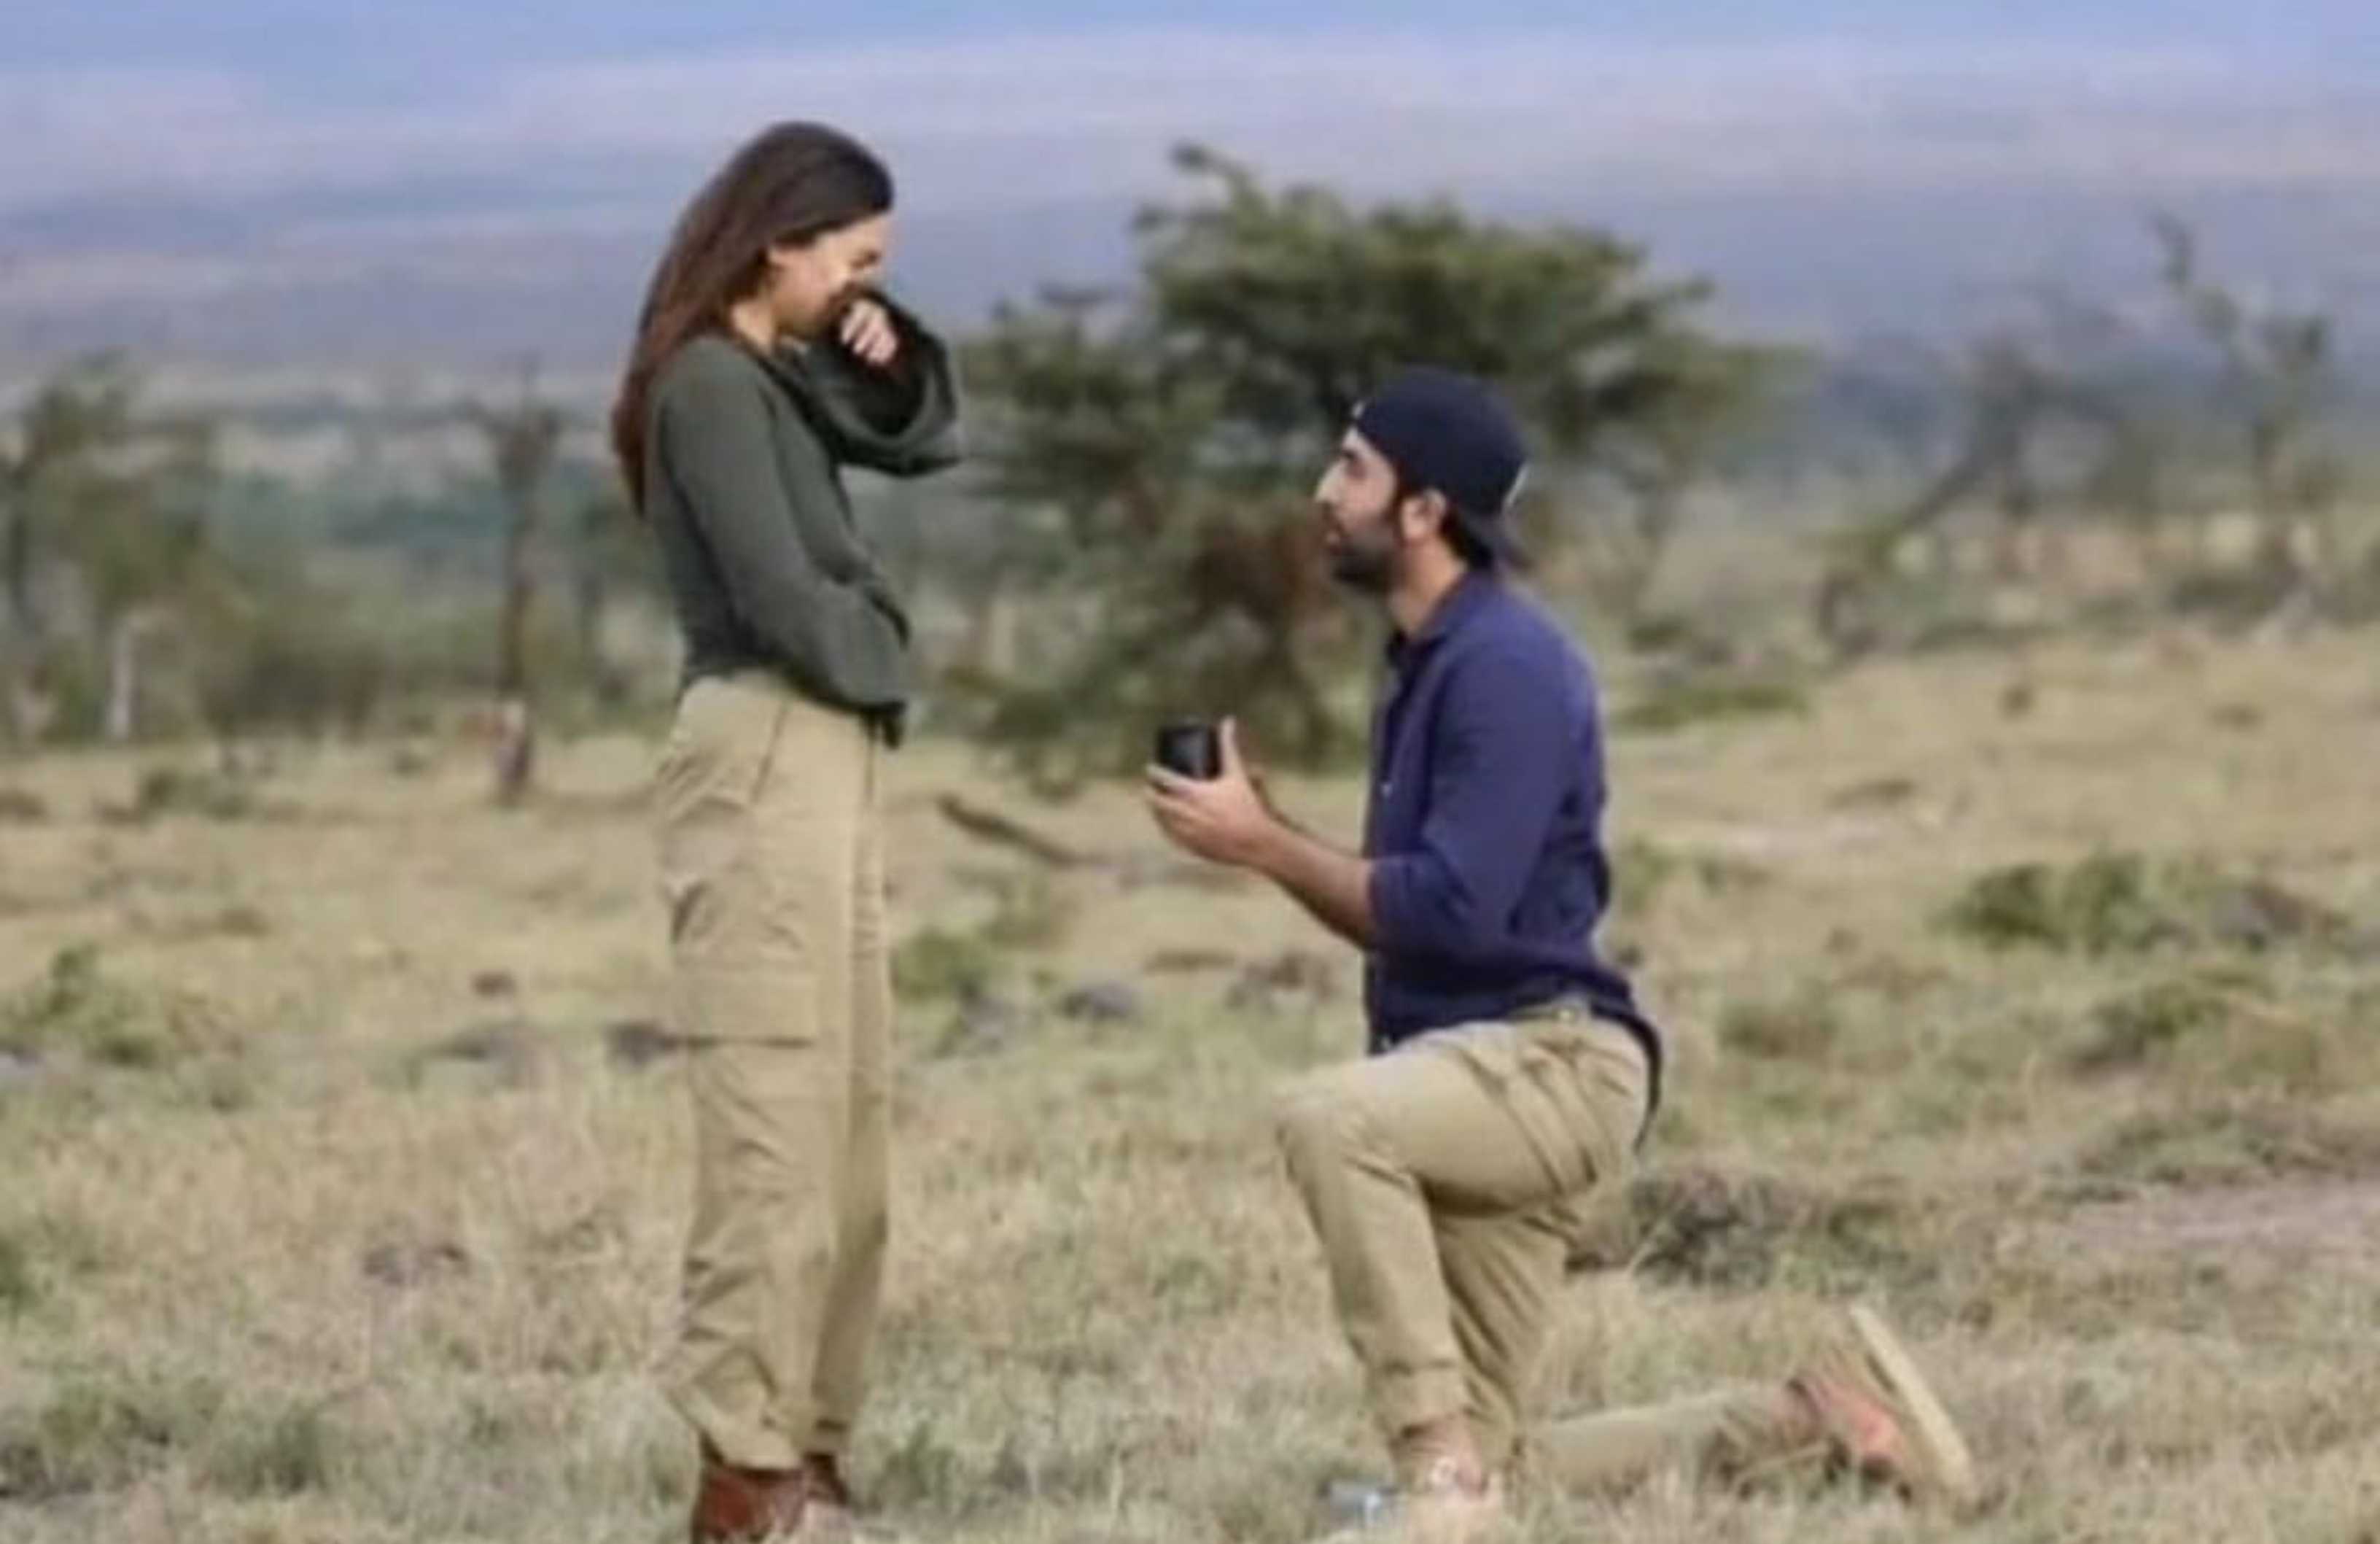 Alia Bhatt breaks down as Ranbir Kapoor goes down in his knees to propose her in this unseen moment, Soni Razdan deletes the pic later